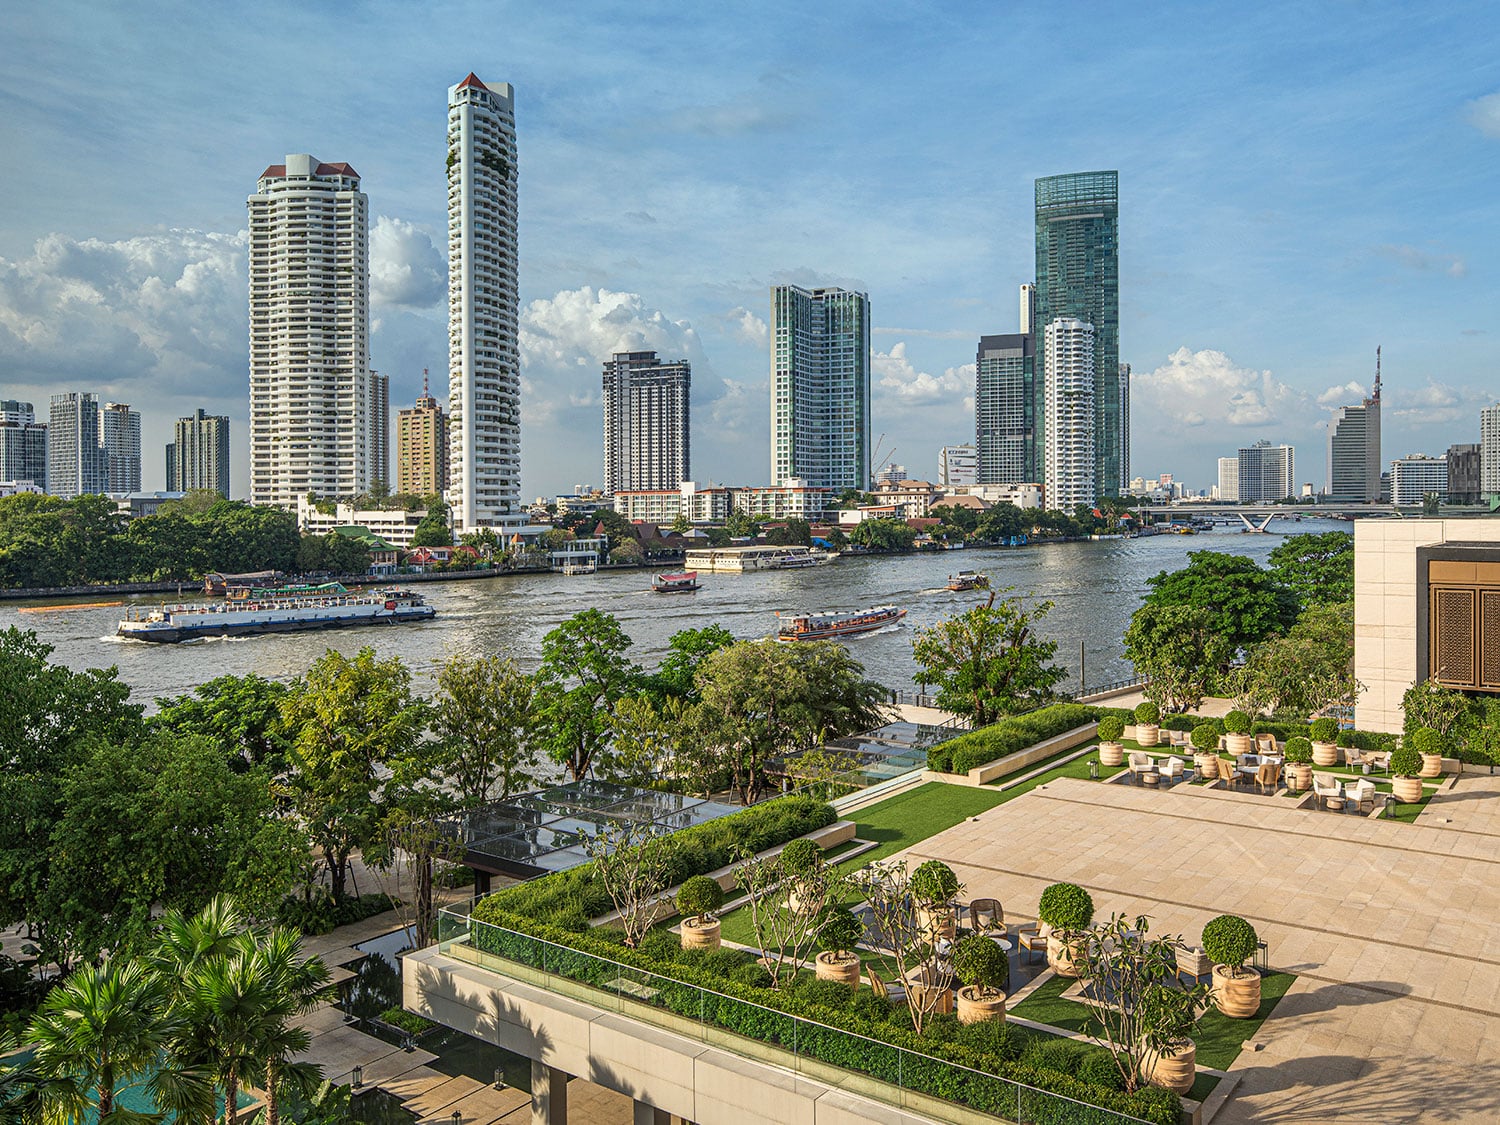 A view of the city and river from Four Seasons Hotel Bangkok at Chao Phraya River in Thailand.